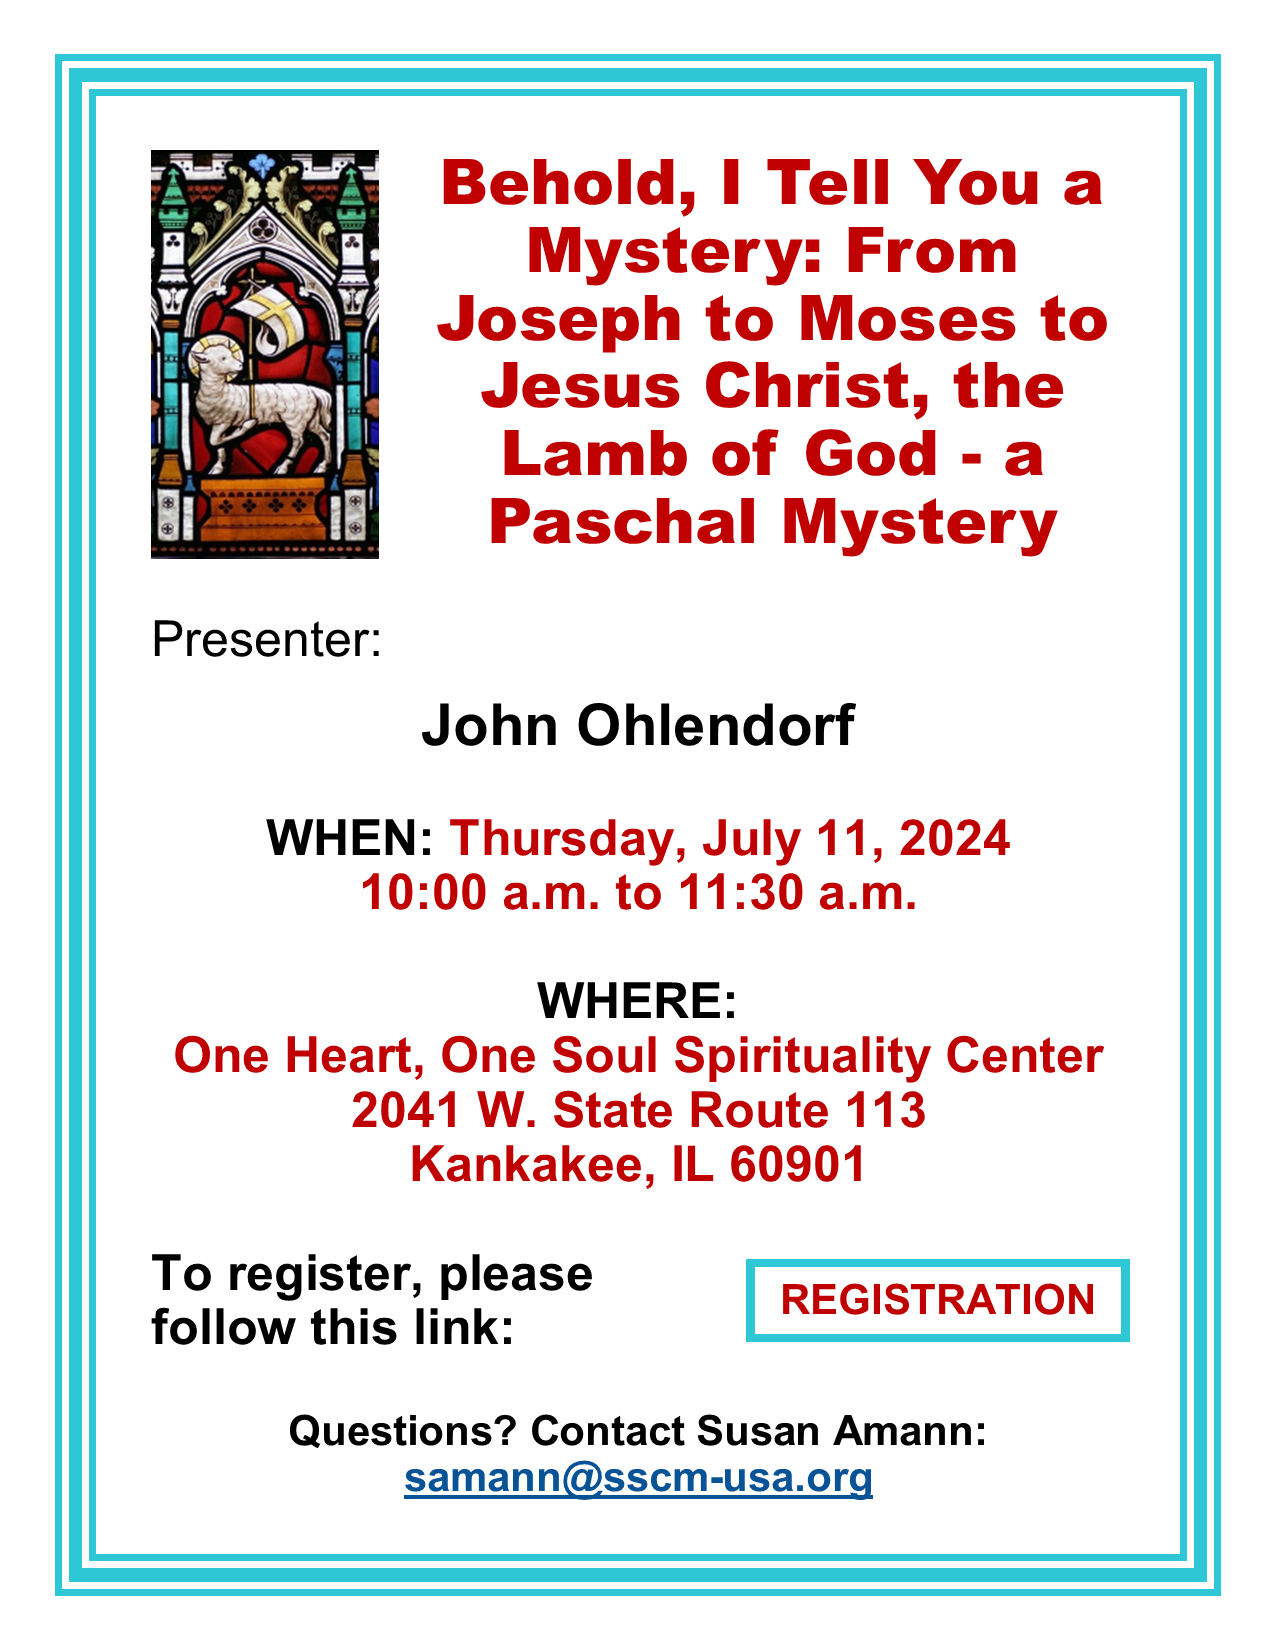 Behold, I Tell You a Mystery: From Joseph to Moses to Jesus Christ, the Lamb of God - a Paschal Mystery: Click here to register